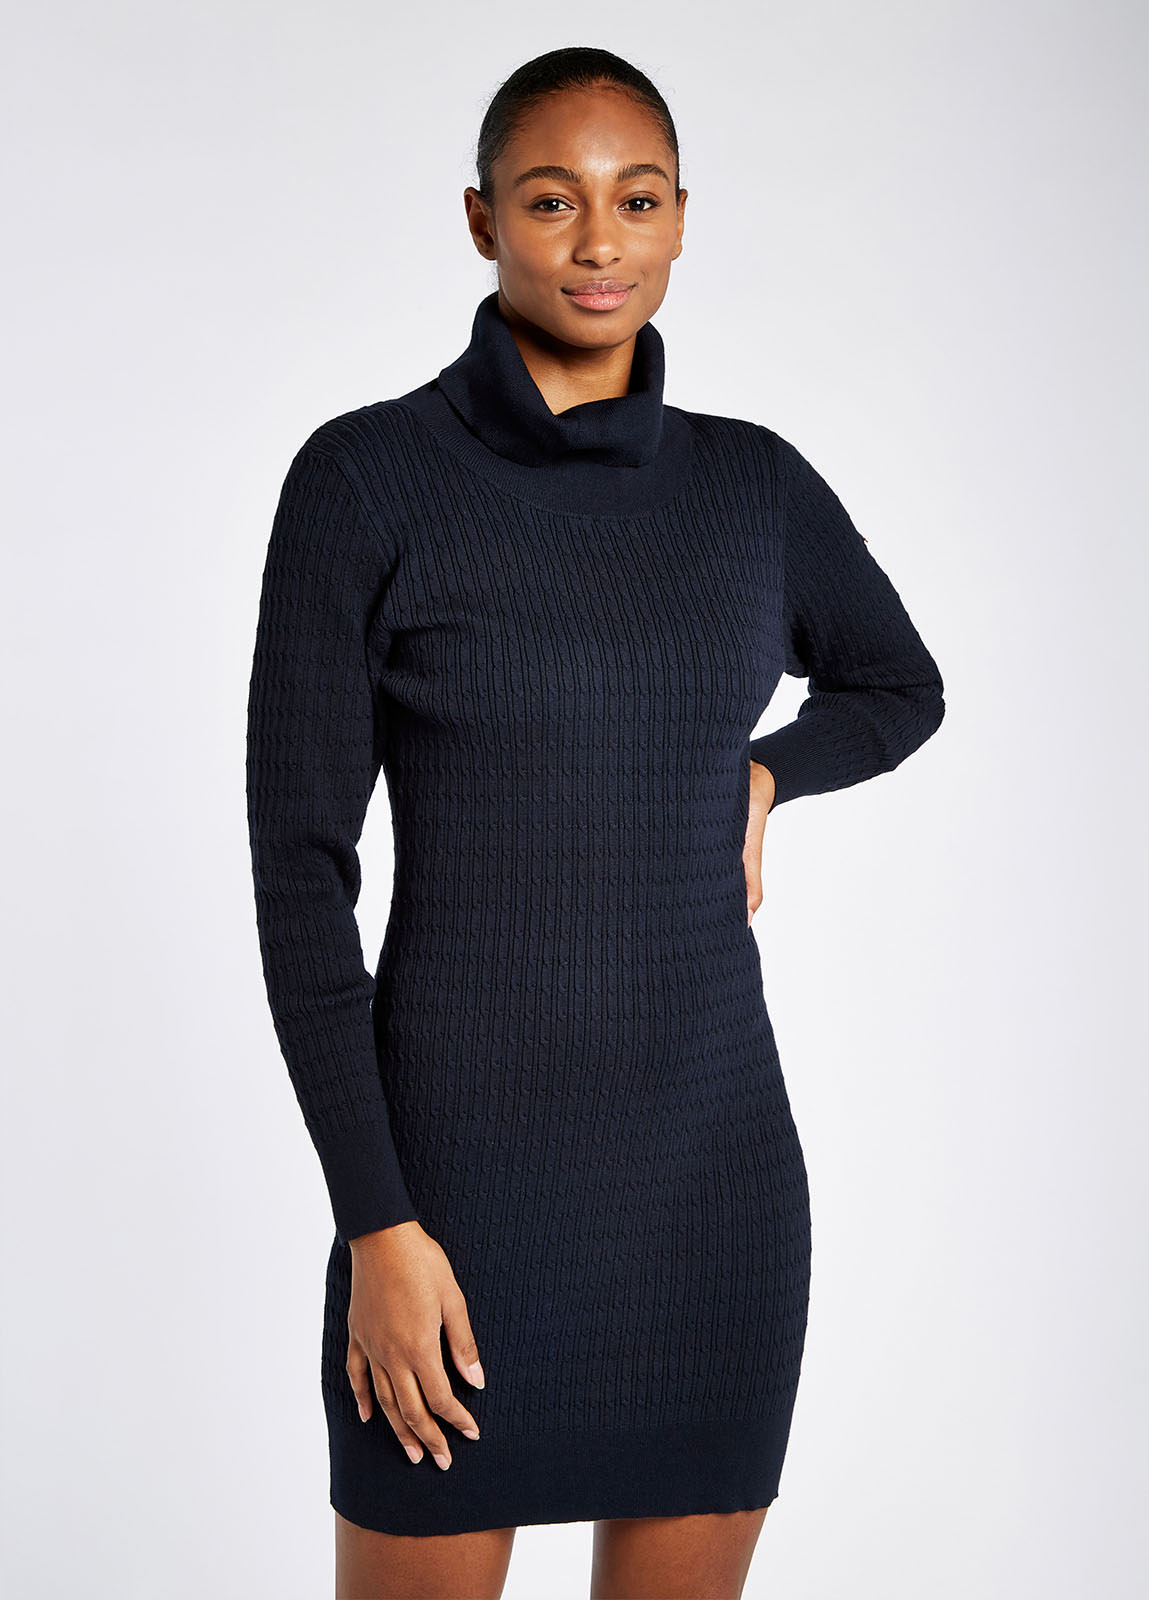 Knitwear Collection for Women